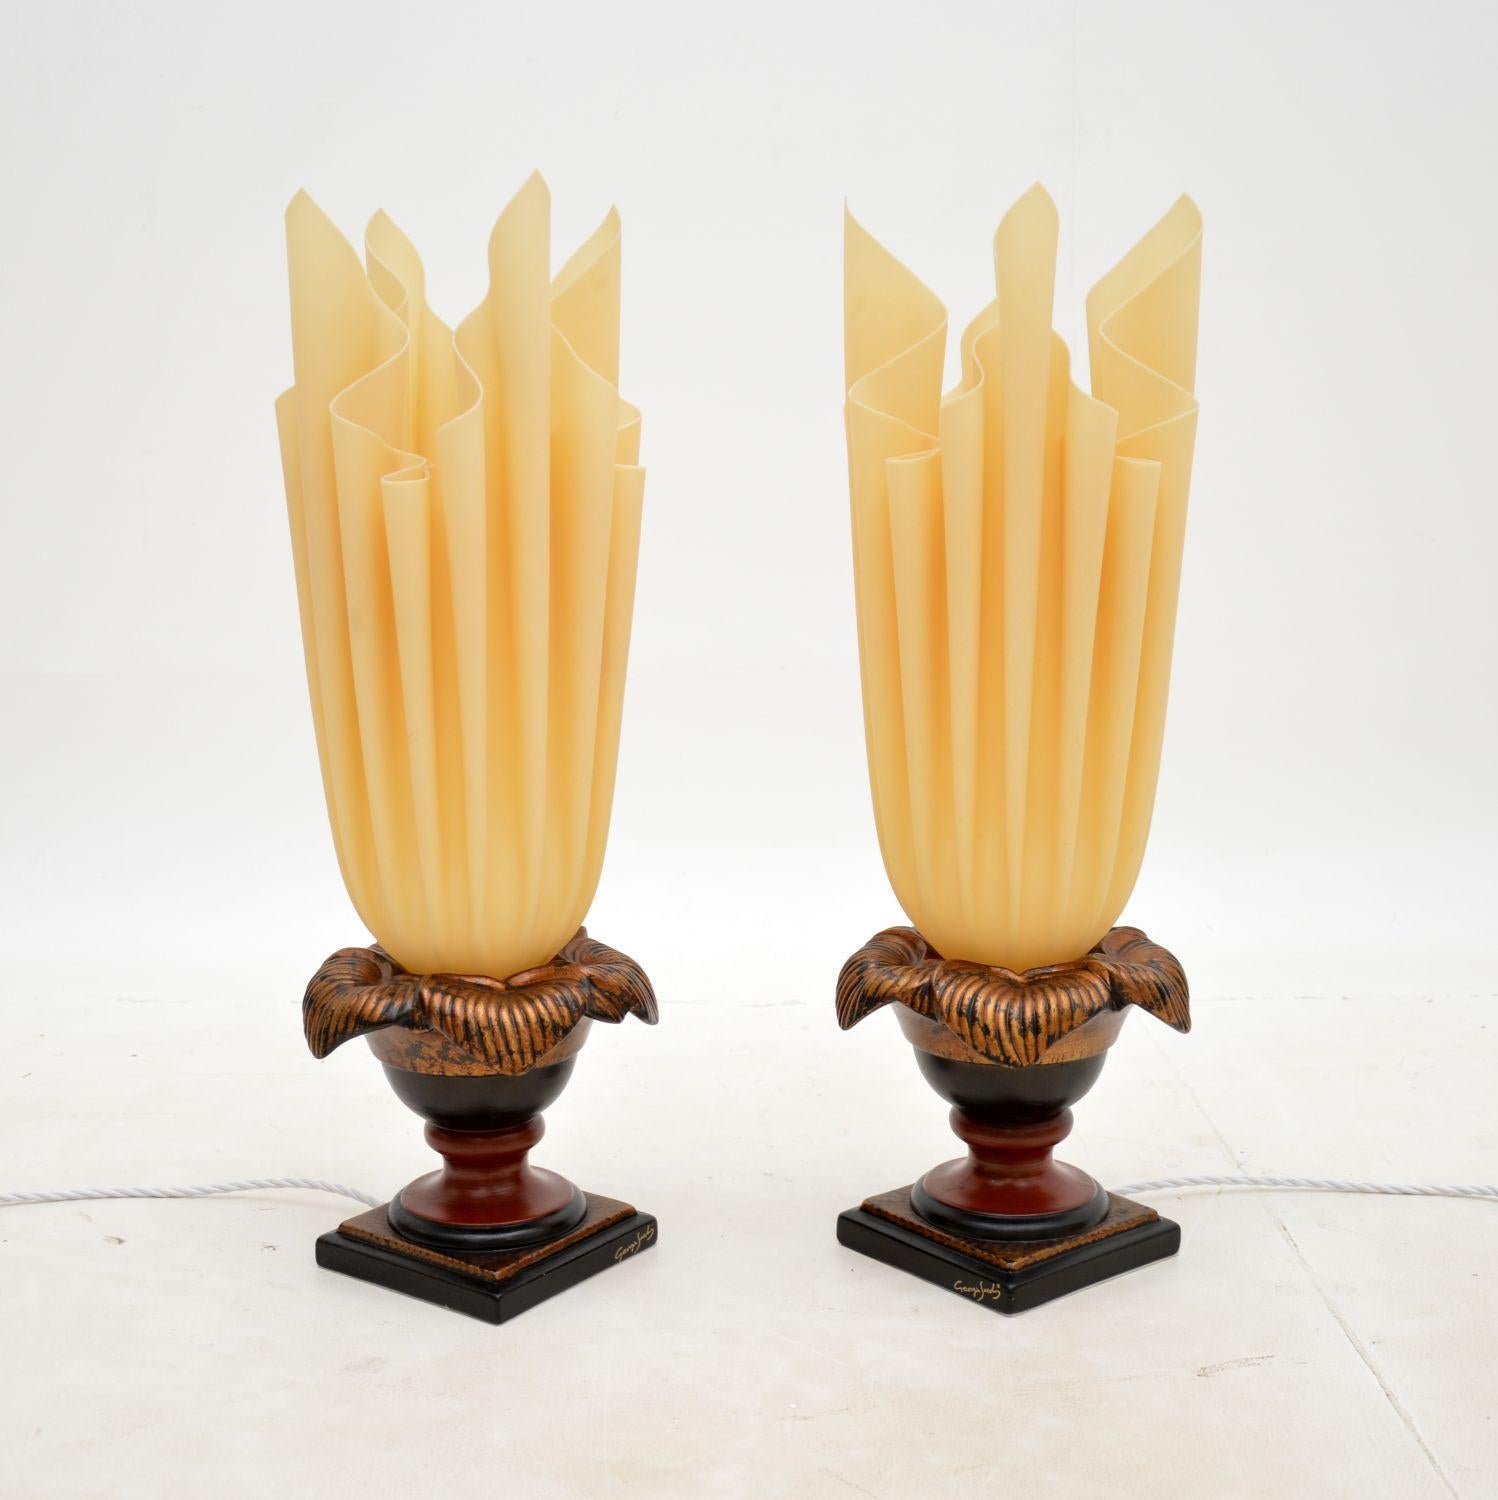 A stunning pair of vintage French ‘Flaming’ table lamps by Georgia Jacob. They were made in Paris, they date from around the 1970’s.

They are of amazing quality and have a stunning design. The shades have a beautiful shape in the manner of flaming